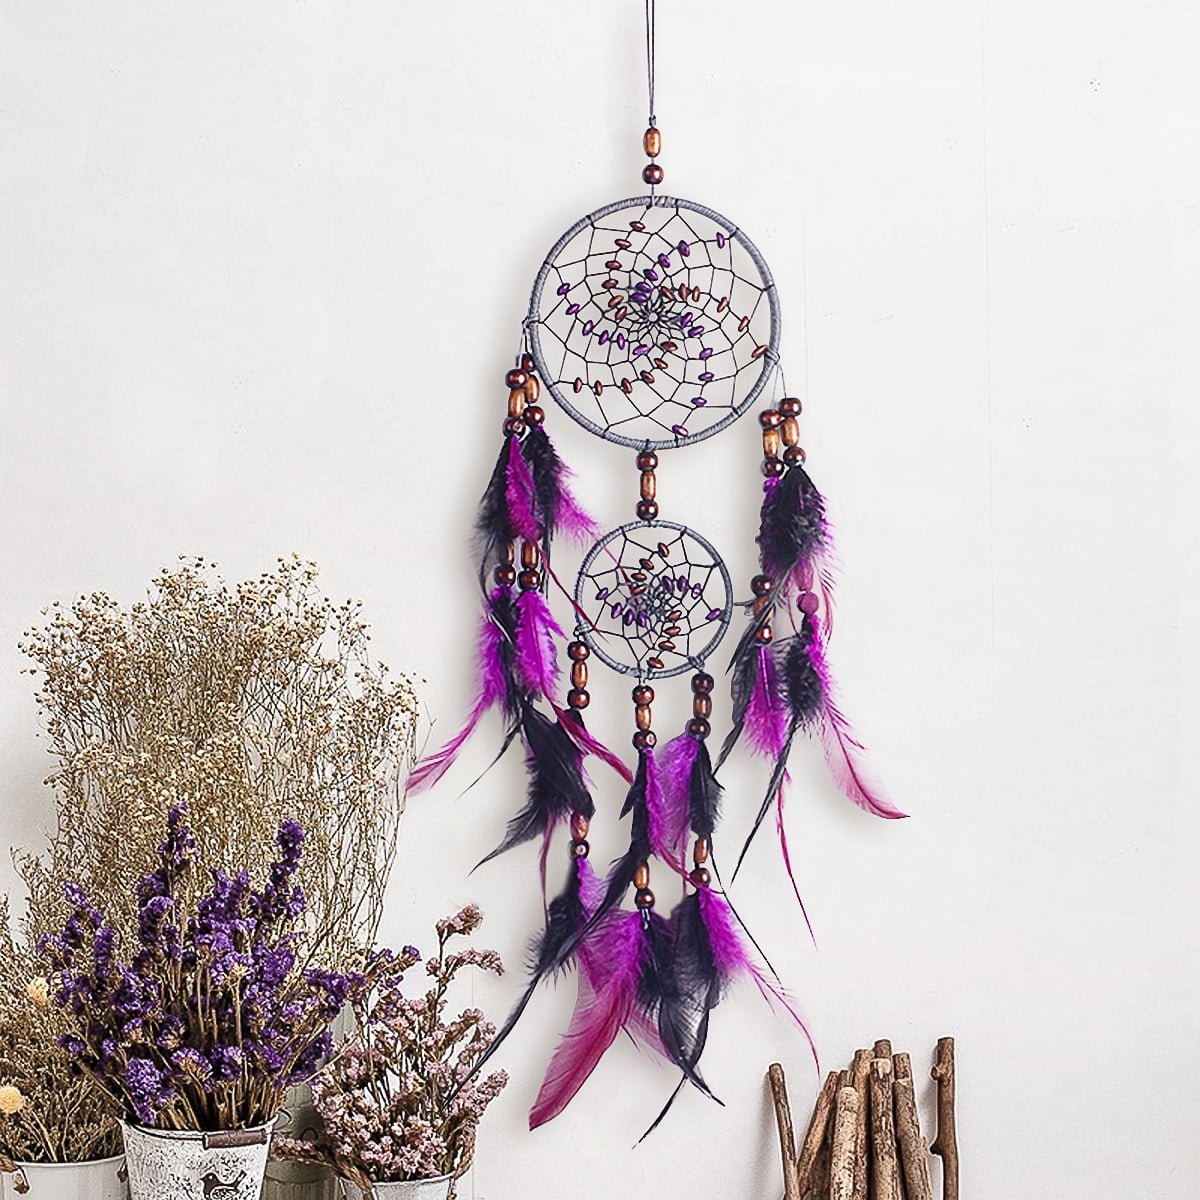 Details about   1pc Dream Catcher Creative Network Beautiful Ornament Girls Home Decor Gift 106# 